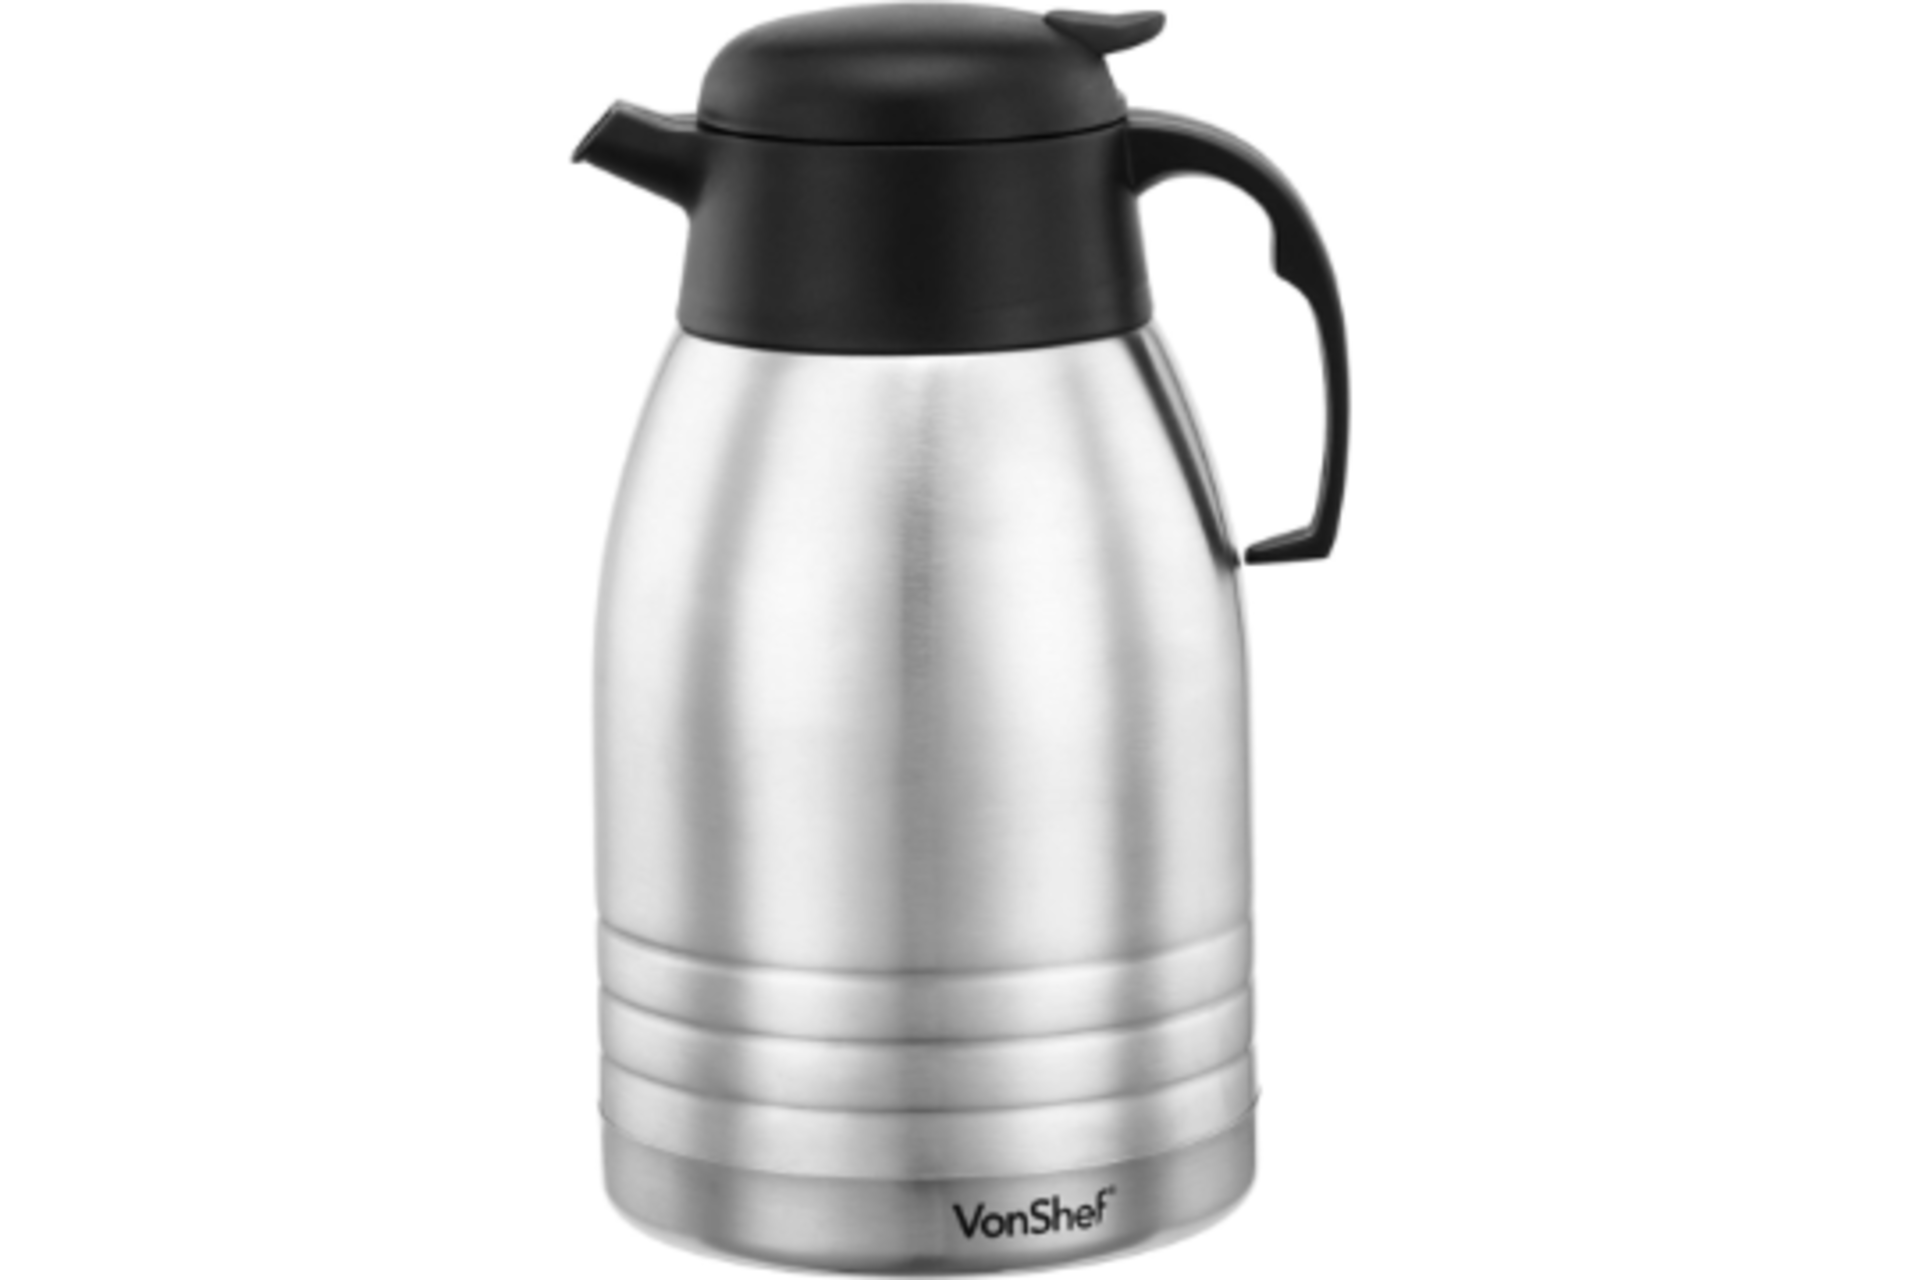 VonShef 2 Litre Insulated Vacuum Jug Flask (ER51) Specifications: Pattern: SolidMaterial: